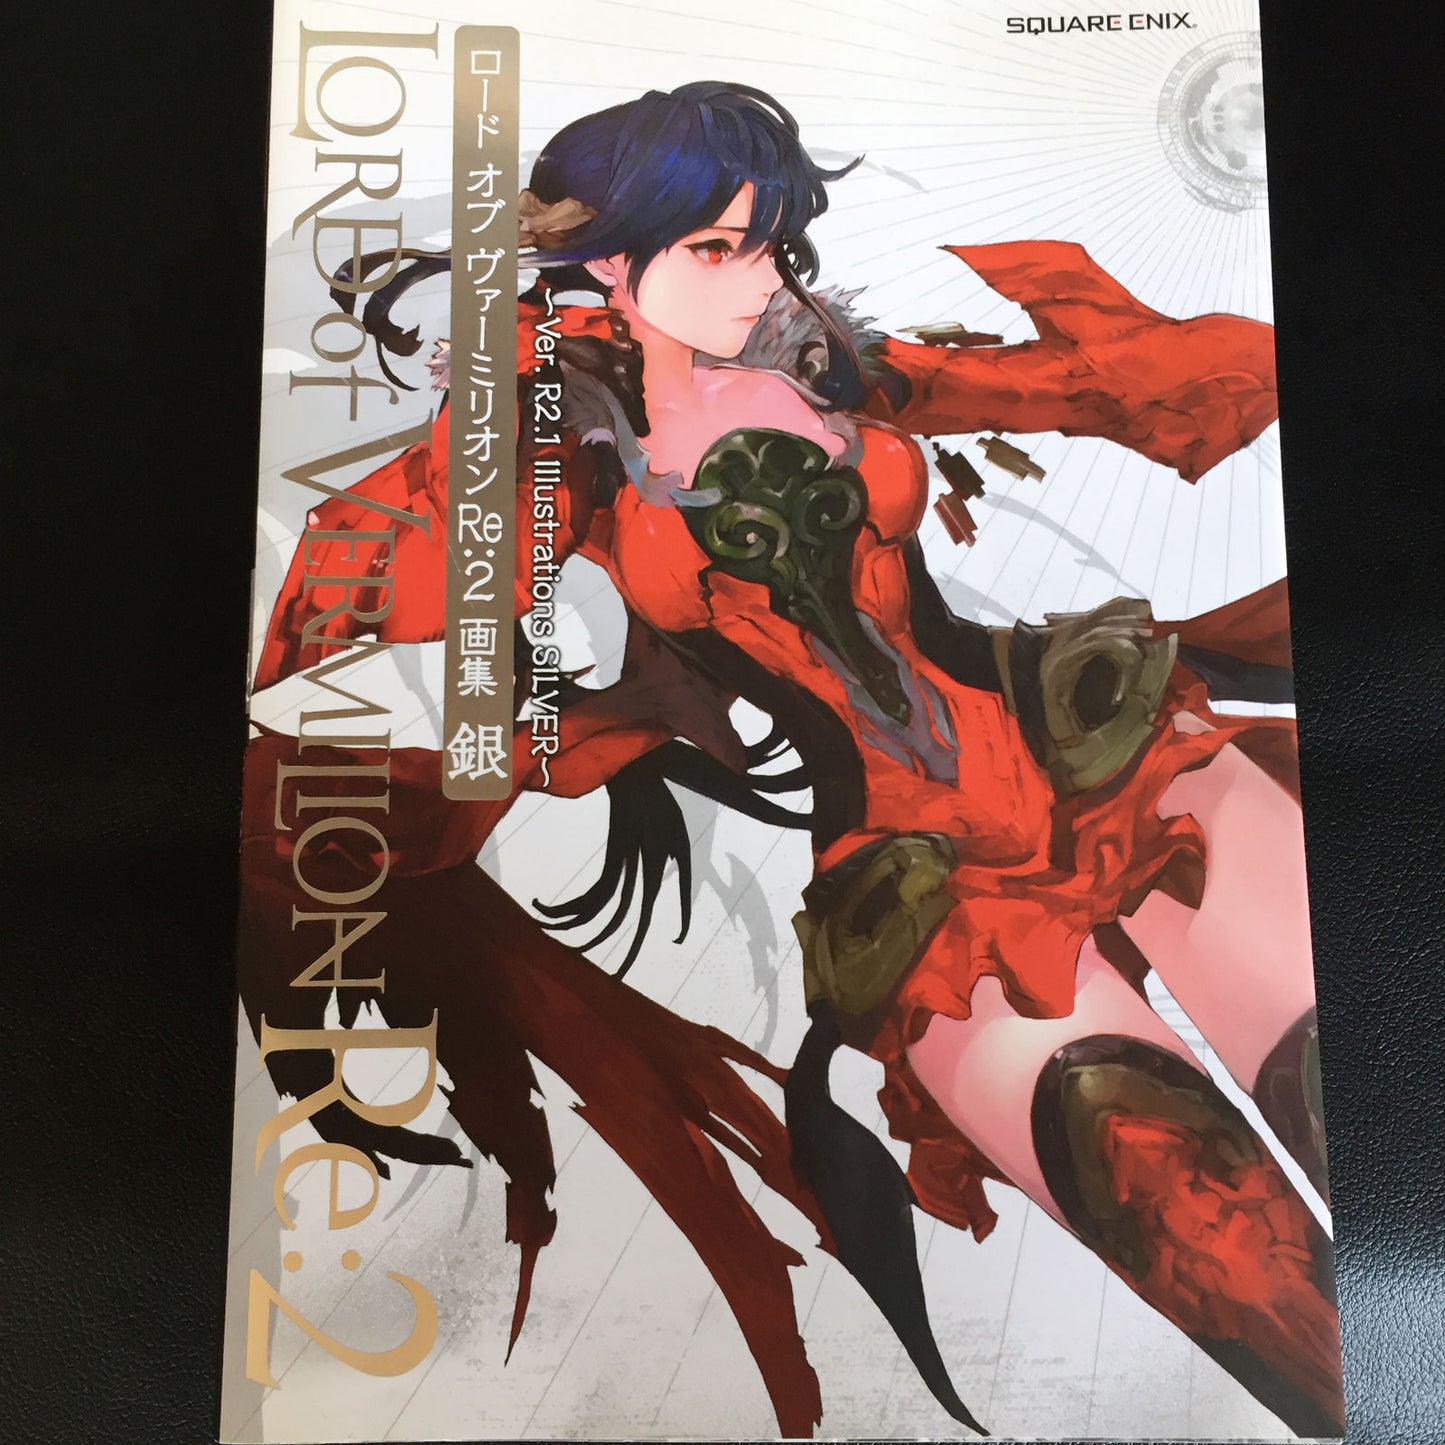 LORD of VERMILION Re:2 Art Book Silver